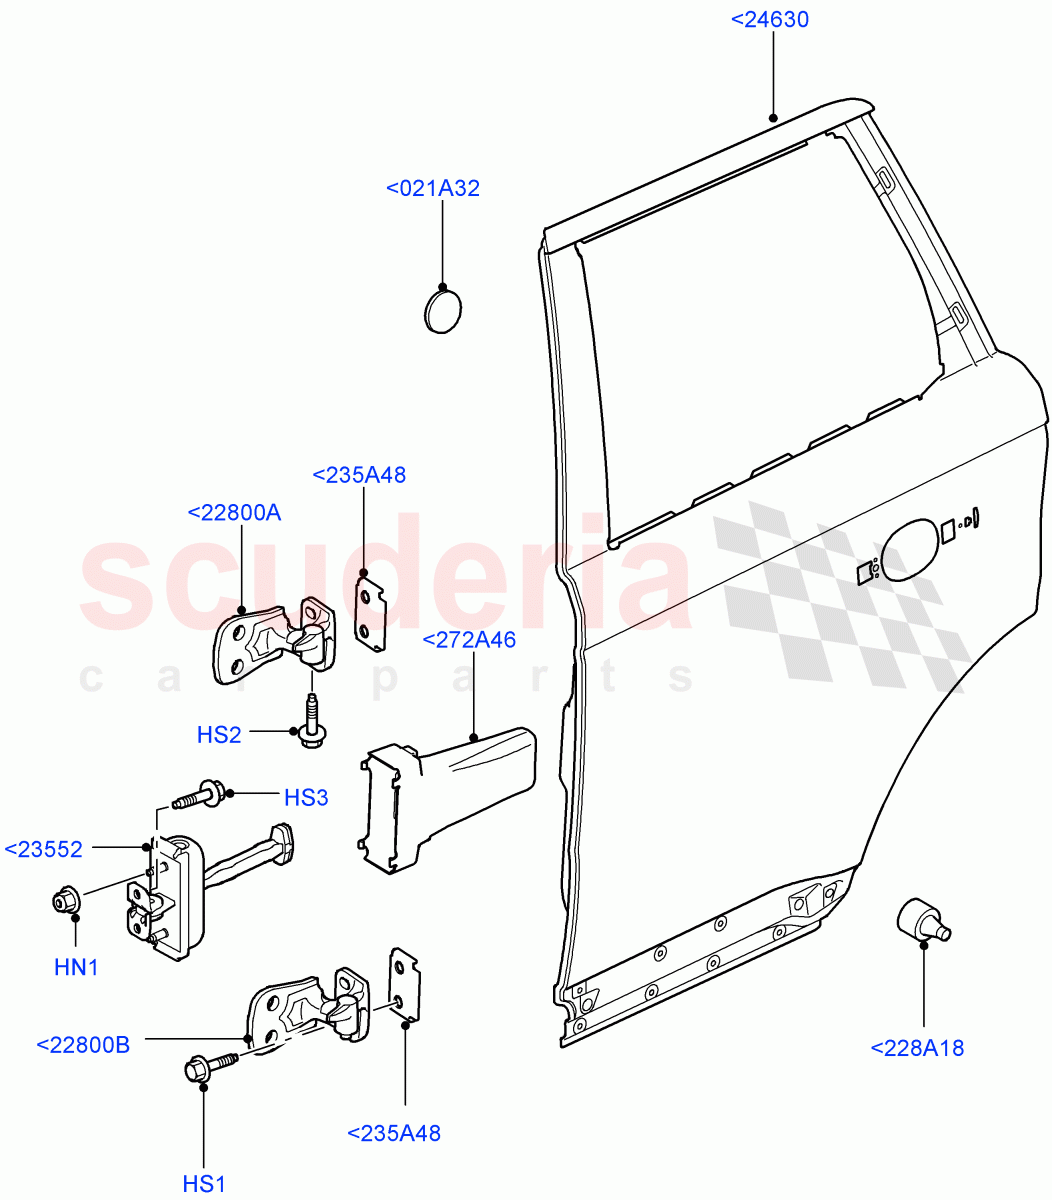 Rear Doors, Hinges & Weatherstrips(Door And Fixings)((V)TO9A999999) of Land Rover Land Rover Range Rover Sport (2005-2009) [2.7 Diesel V6]